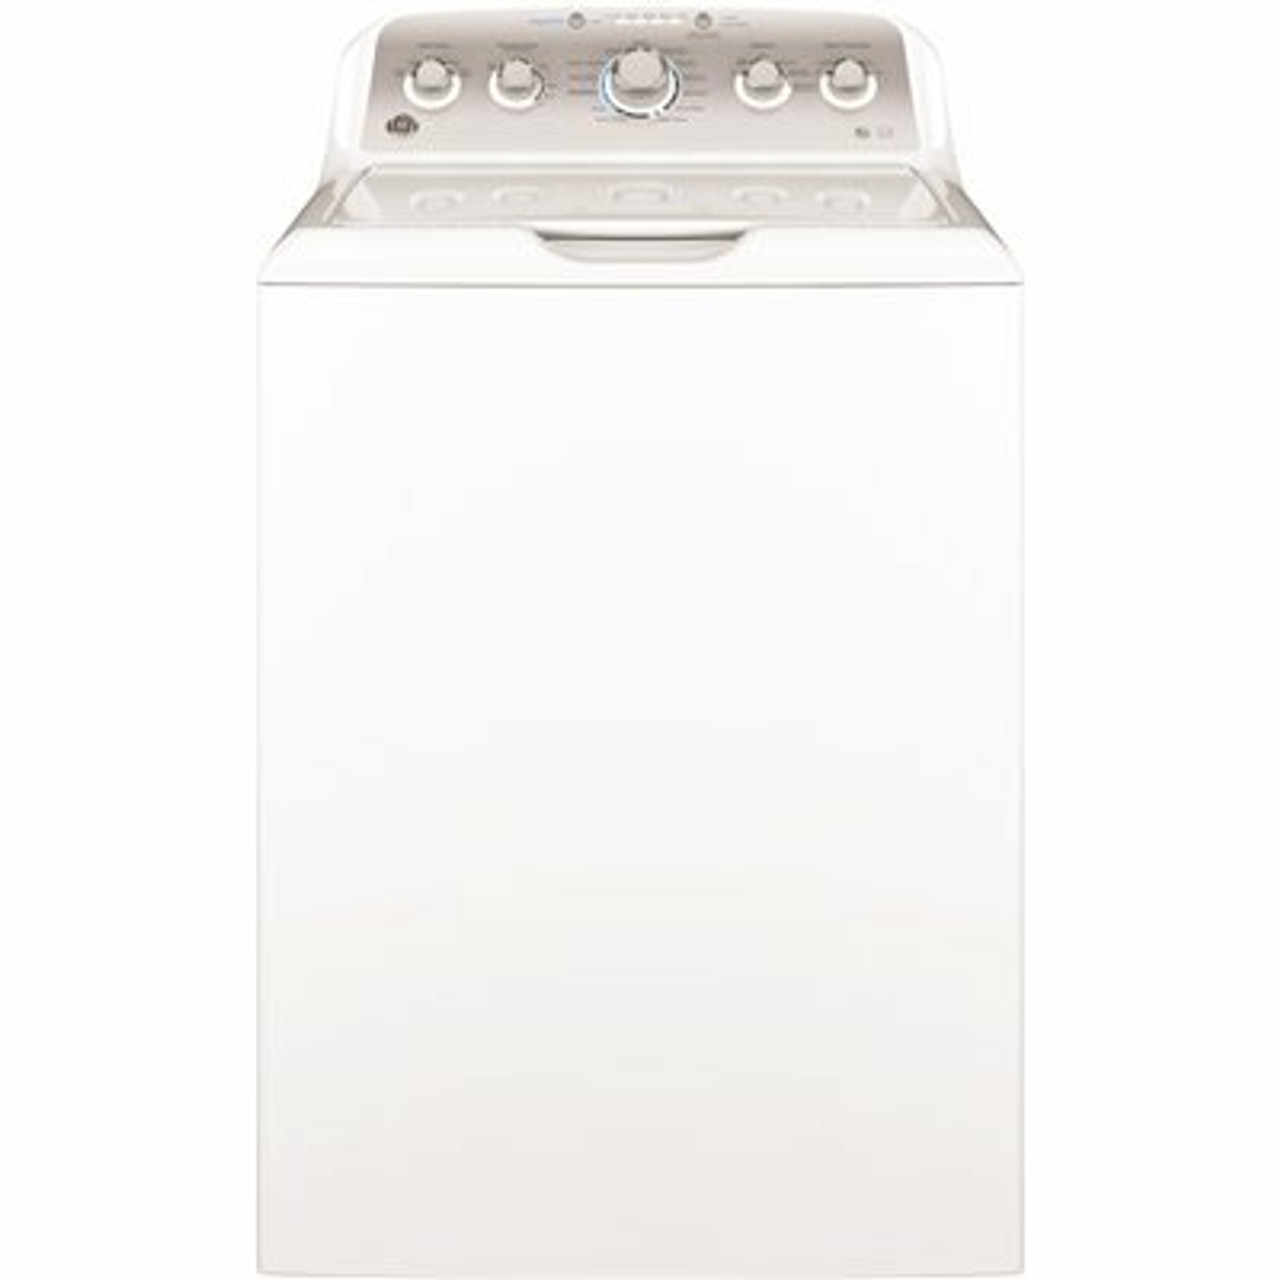 Ge 4.6 Cu. Ft. High-Efficiency White Top Load Washing Machine With Stainless Steel Basket, Energy Star